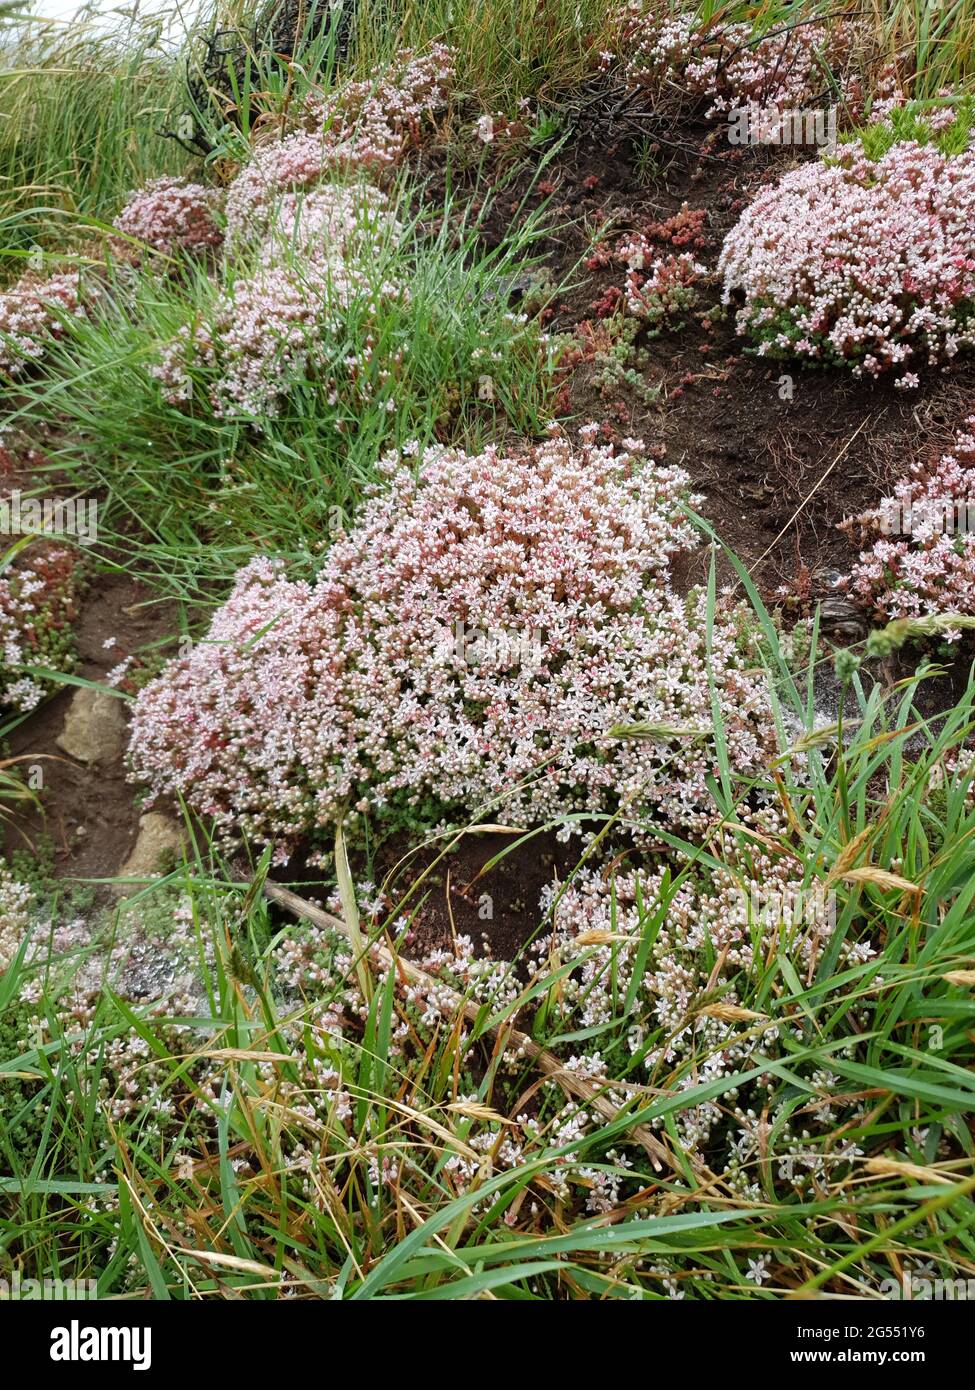 Sedum Album otherwise known as White Stonecrop a summer wildflower plant with a white pink summertime flower, stock photo image Stock Photo